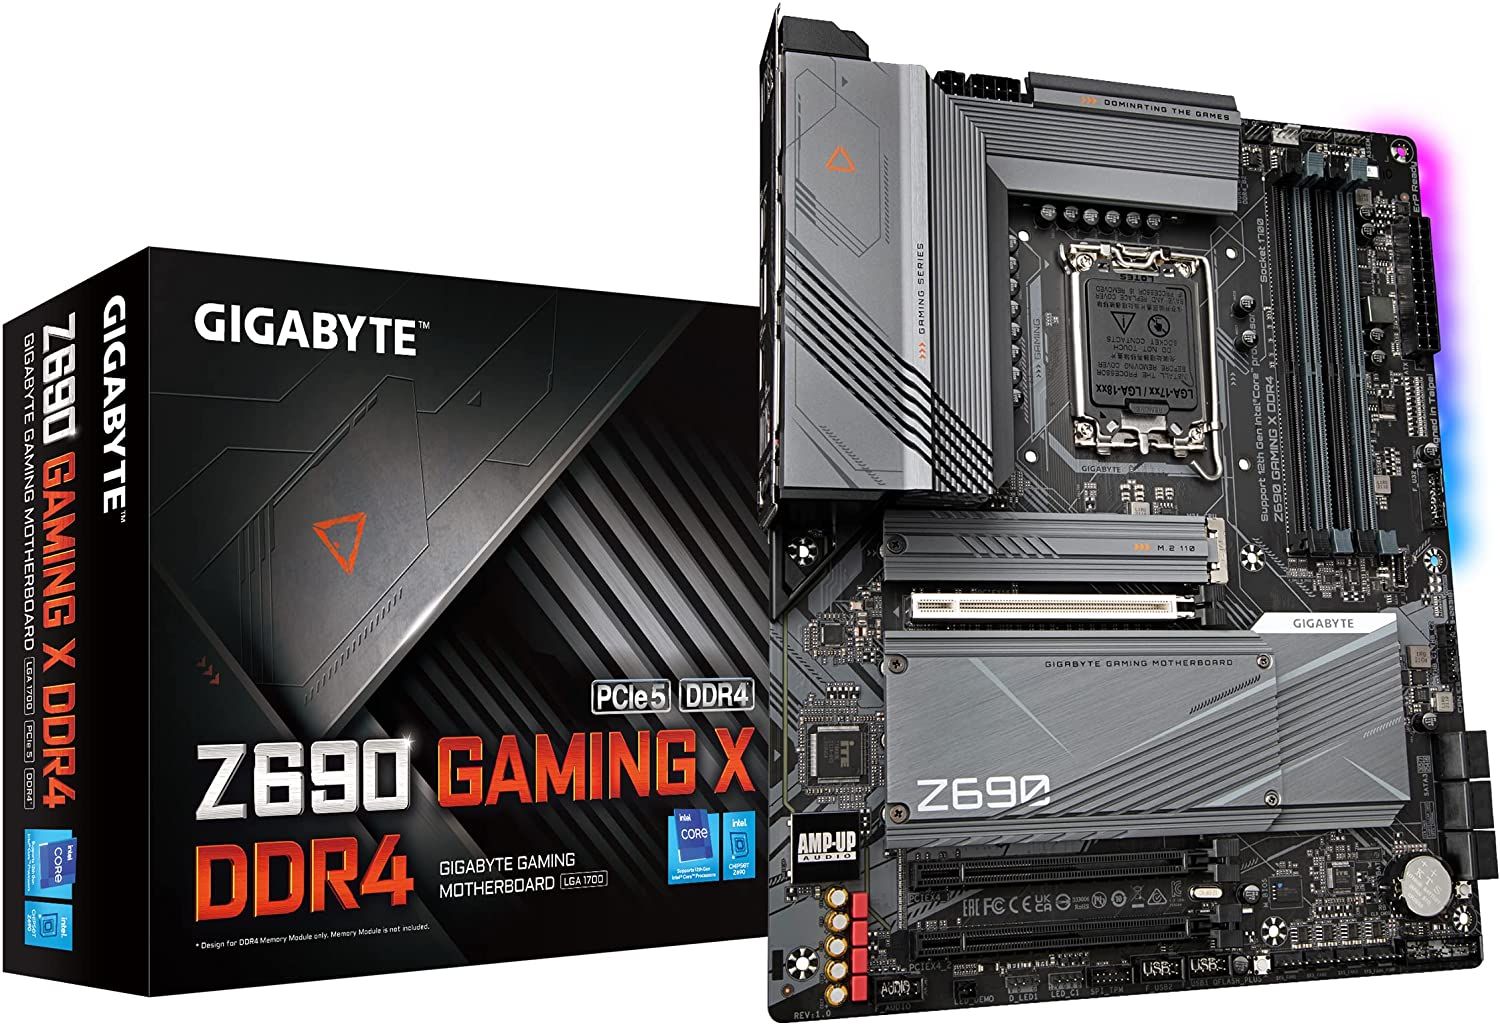 An image showing a complete view of GIGABYTE Z690 Gaming